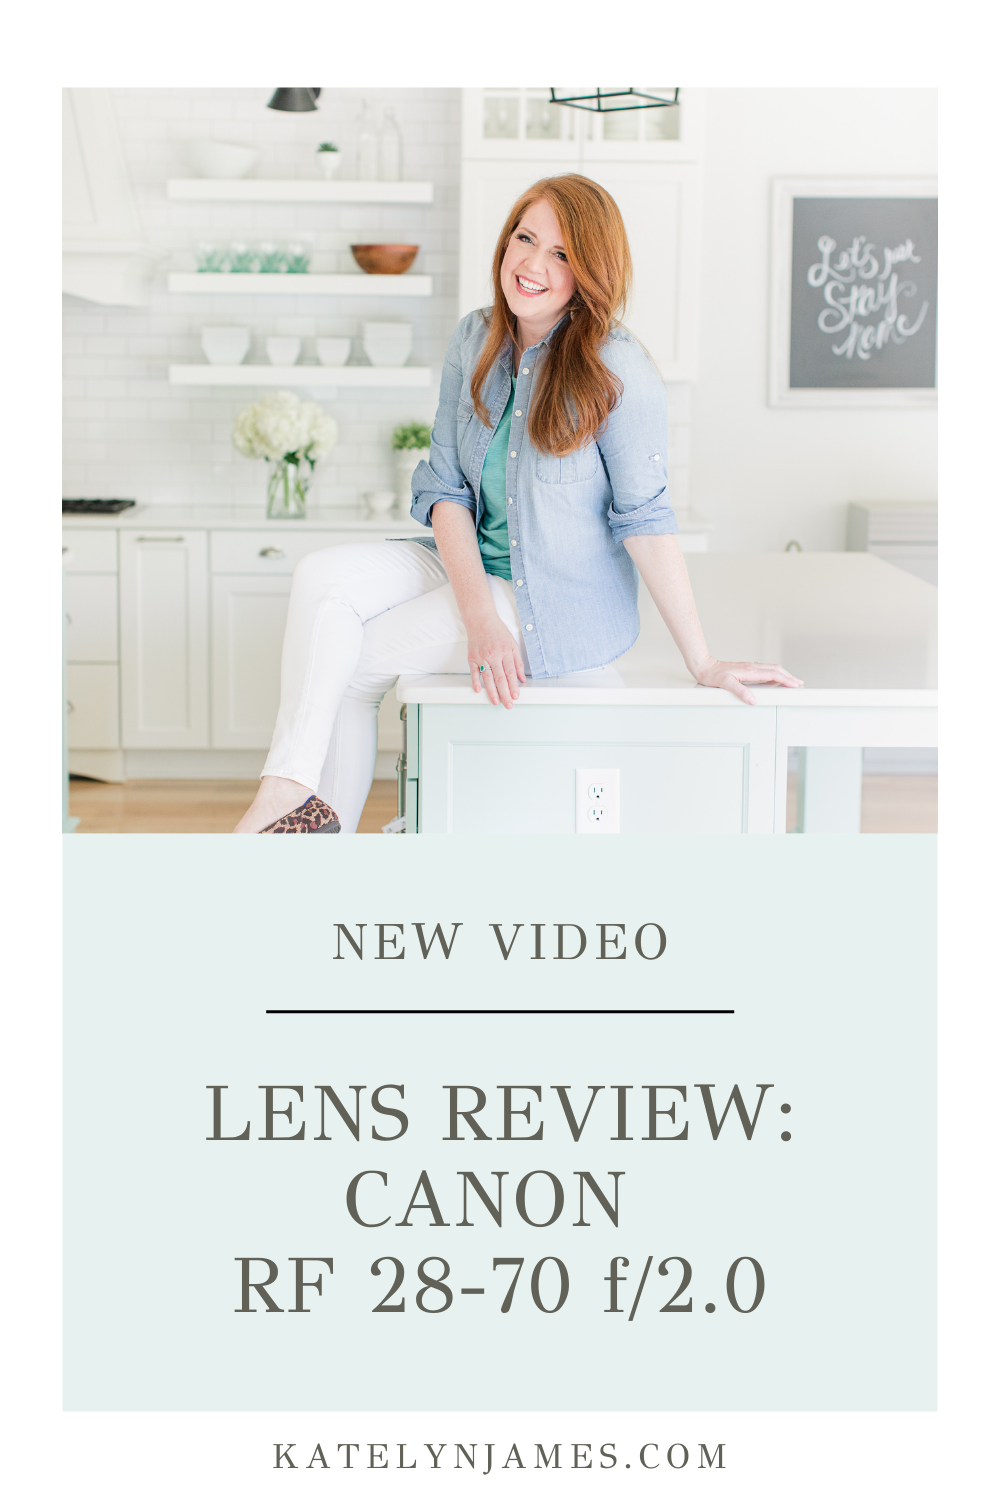 Lens Review: Canon RF 28-70 f/2.0